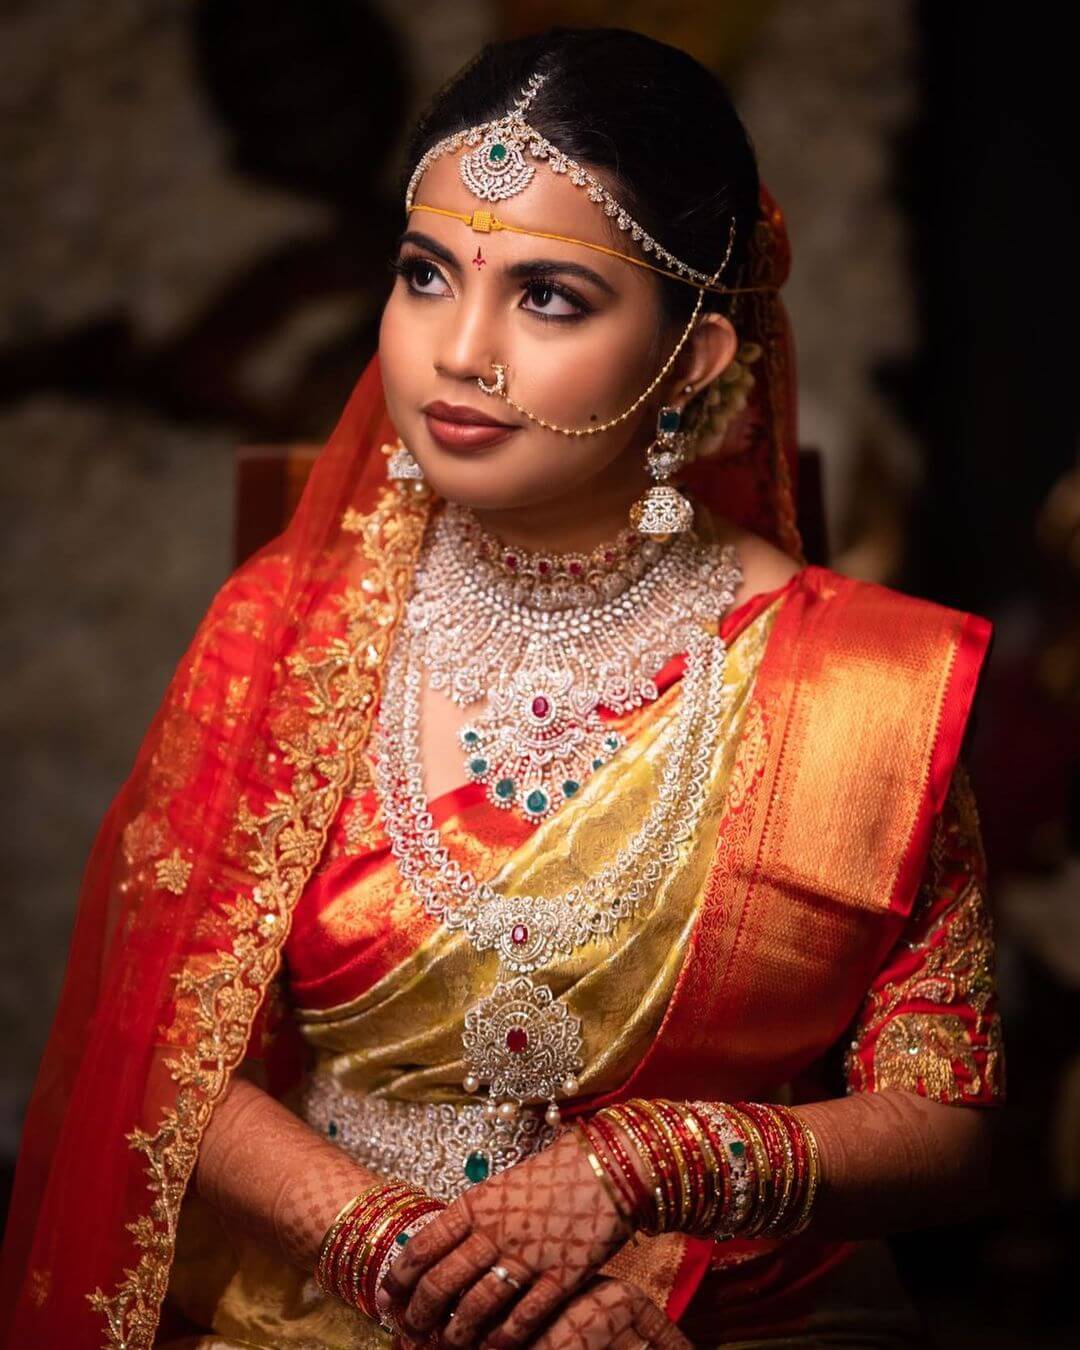 Pretty Diamond Jewellery Look For South Indian Brides